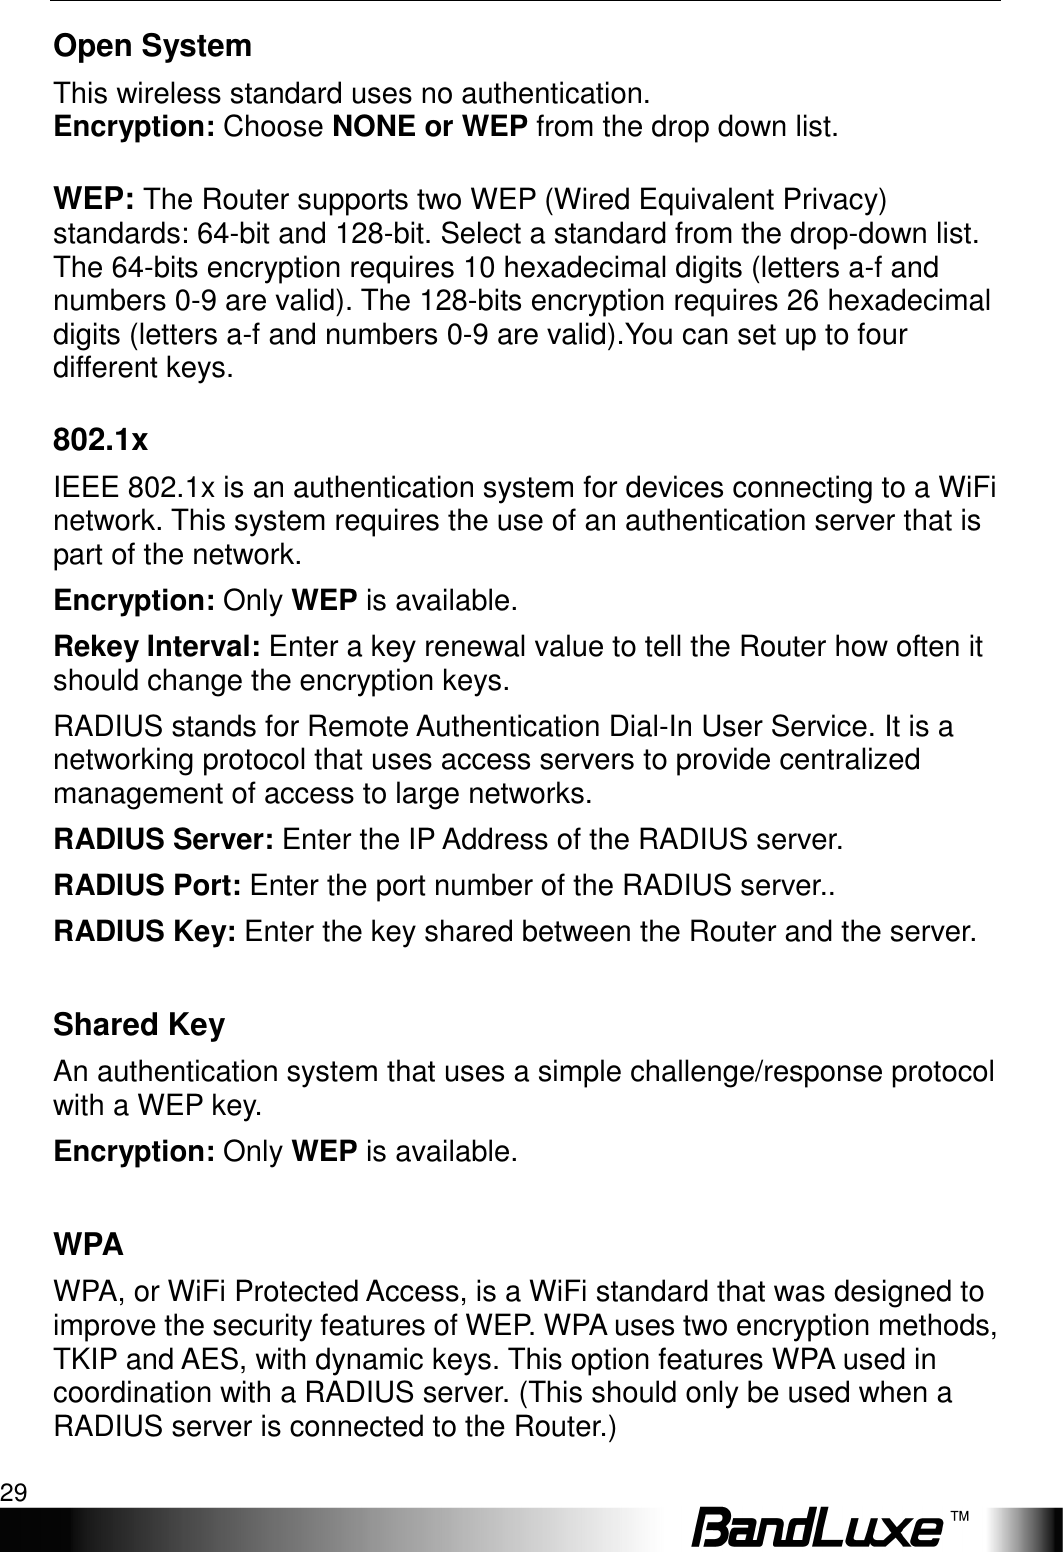   WiFi Setup 29 Open System This wireless standard uses no authentication. Encryption: Choose NONE or WEP from the drop down list.   WEP: The Router supports two WEP (Wired Equivalent Privacy) standards: 64-bit and 128-bit. Select a standard from the drop-down list. The 64-bits encryption requires 10 hexadecimal digits (letters a-f and numbers 0-9 are valid). The 128-bits encryption requires 26 hexadecimal digits (letters a-f and numbers 0-9 are valid).You can set up to four different keys. 802.1x IEEE 802.1x is an authentication system for devices connecting to a WiFi network. This system requires the use of an authentication server that is part of the network.   Encryption: Only WEP is available. Rekey Interval: Enter a key renewal value to tell the Router how often it should change the encryption keys.   RADIUS stands for Remote Authentication Dial-In User Service. It is a networking protocol that uses access servers to provide centralized management of access to large networks.   RADIUS Server: Enter the IP Address of the RADIUS server. RADIUS Port: Enter the port number of the RADIUS server.. RADIUS Key: Enter the key shared between the Router and the server.  Shared Key An authentication system that uses a simple challenge/response protocol with a WEP key. Encryption: Only WEP is available.  WPA WPA, or WiFi Protected Access, is a WiFi standard that was designed to improve the security features of WEP. WPA uses two encryption methods, TKIP and AES, with dynamic keys. This option features WPA used in coordination with a RADIUS server. (This should only be used when a RADIUS server is connected to the Router.) 